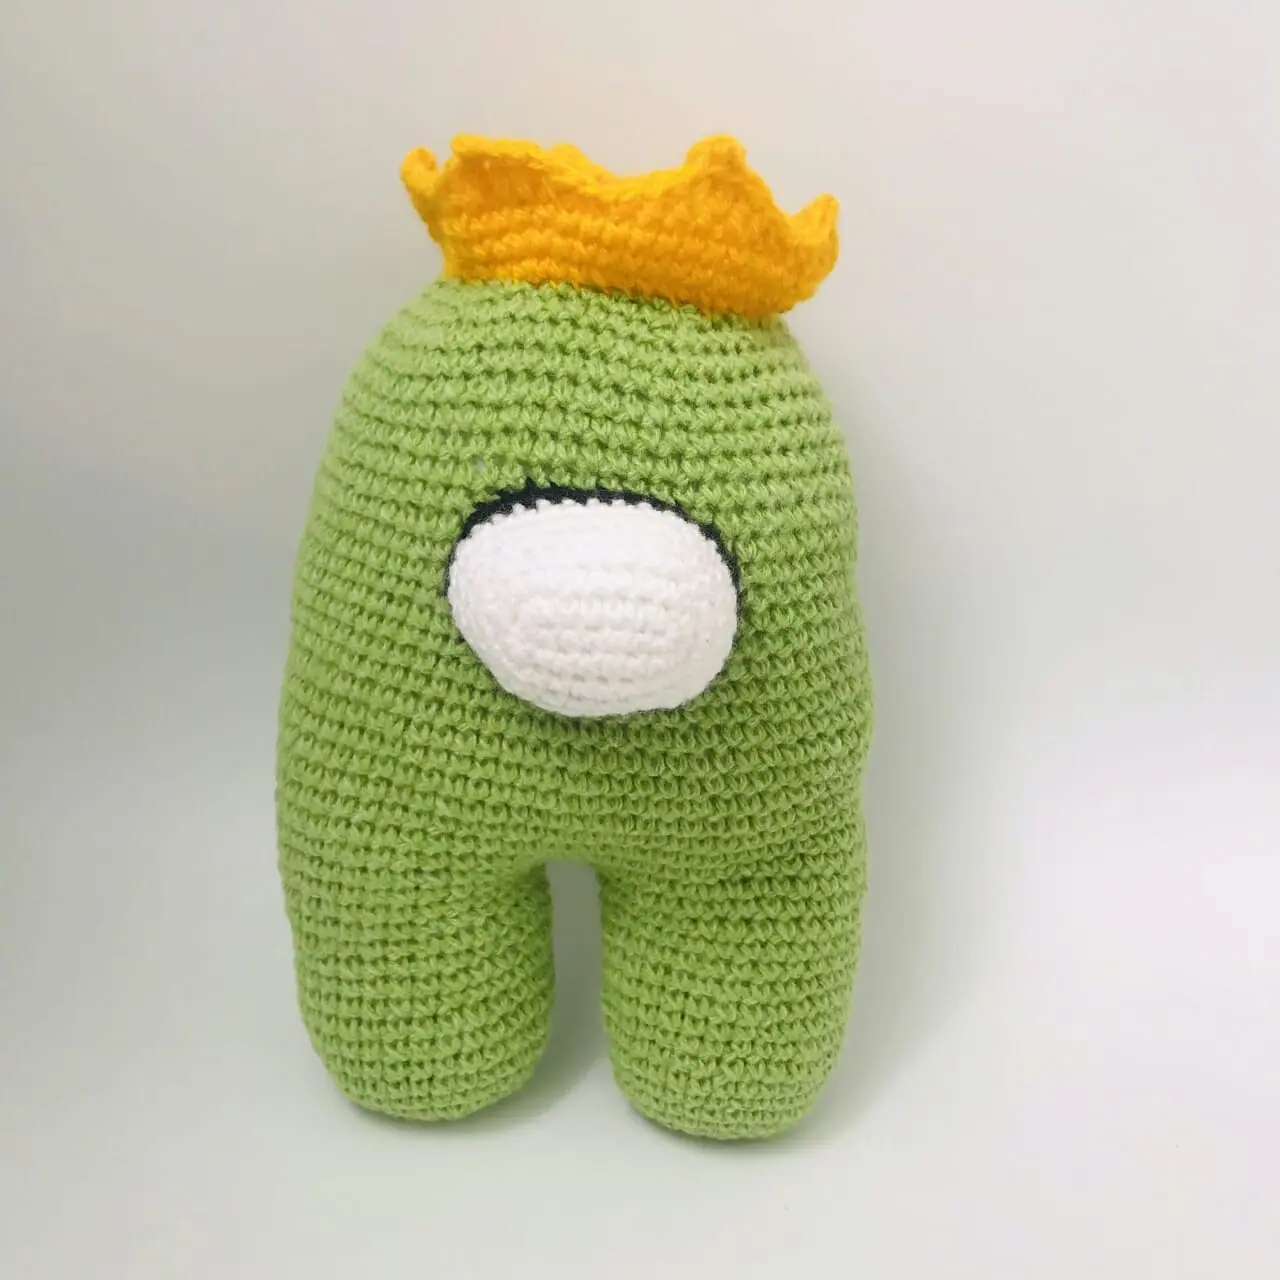 Knitted decorative toy “Green Cosmonaut”